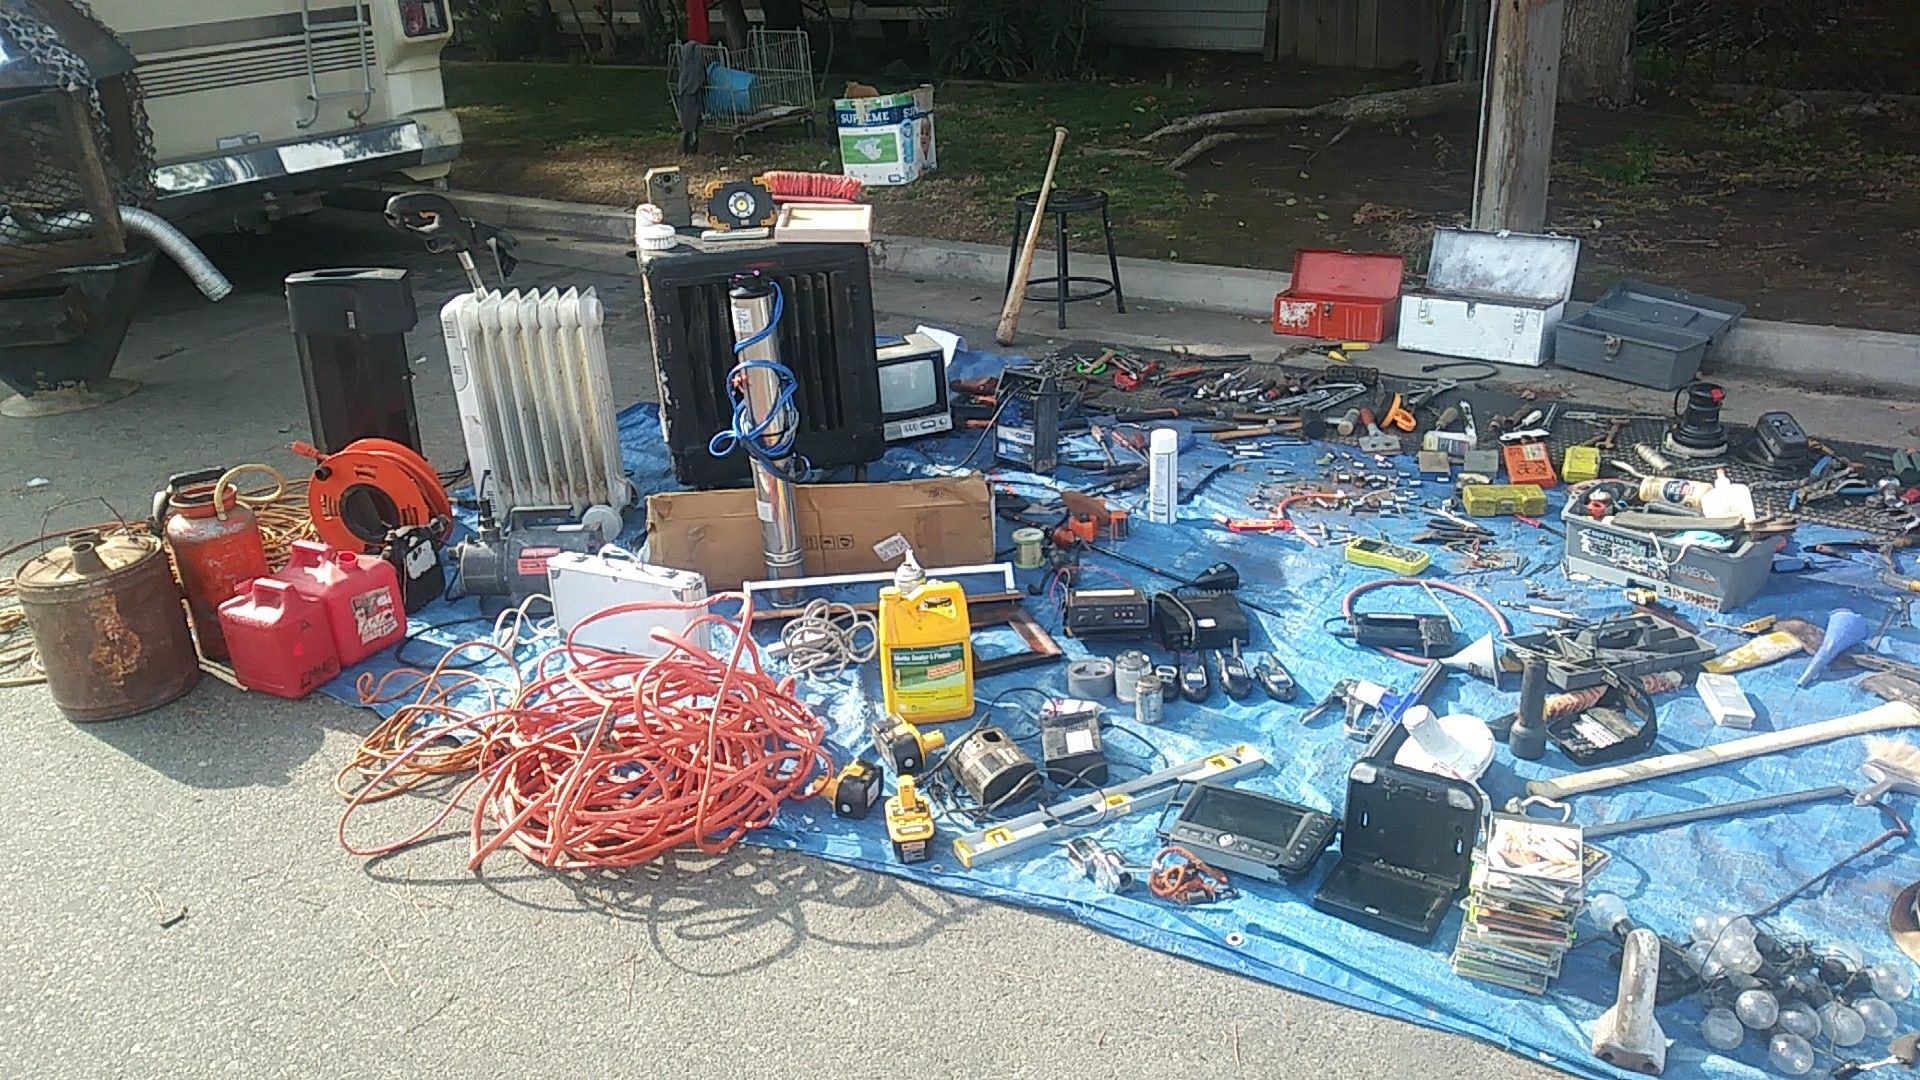 Tools..heaters..fireplace..kenwood...air compressor..submersible deep well pump